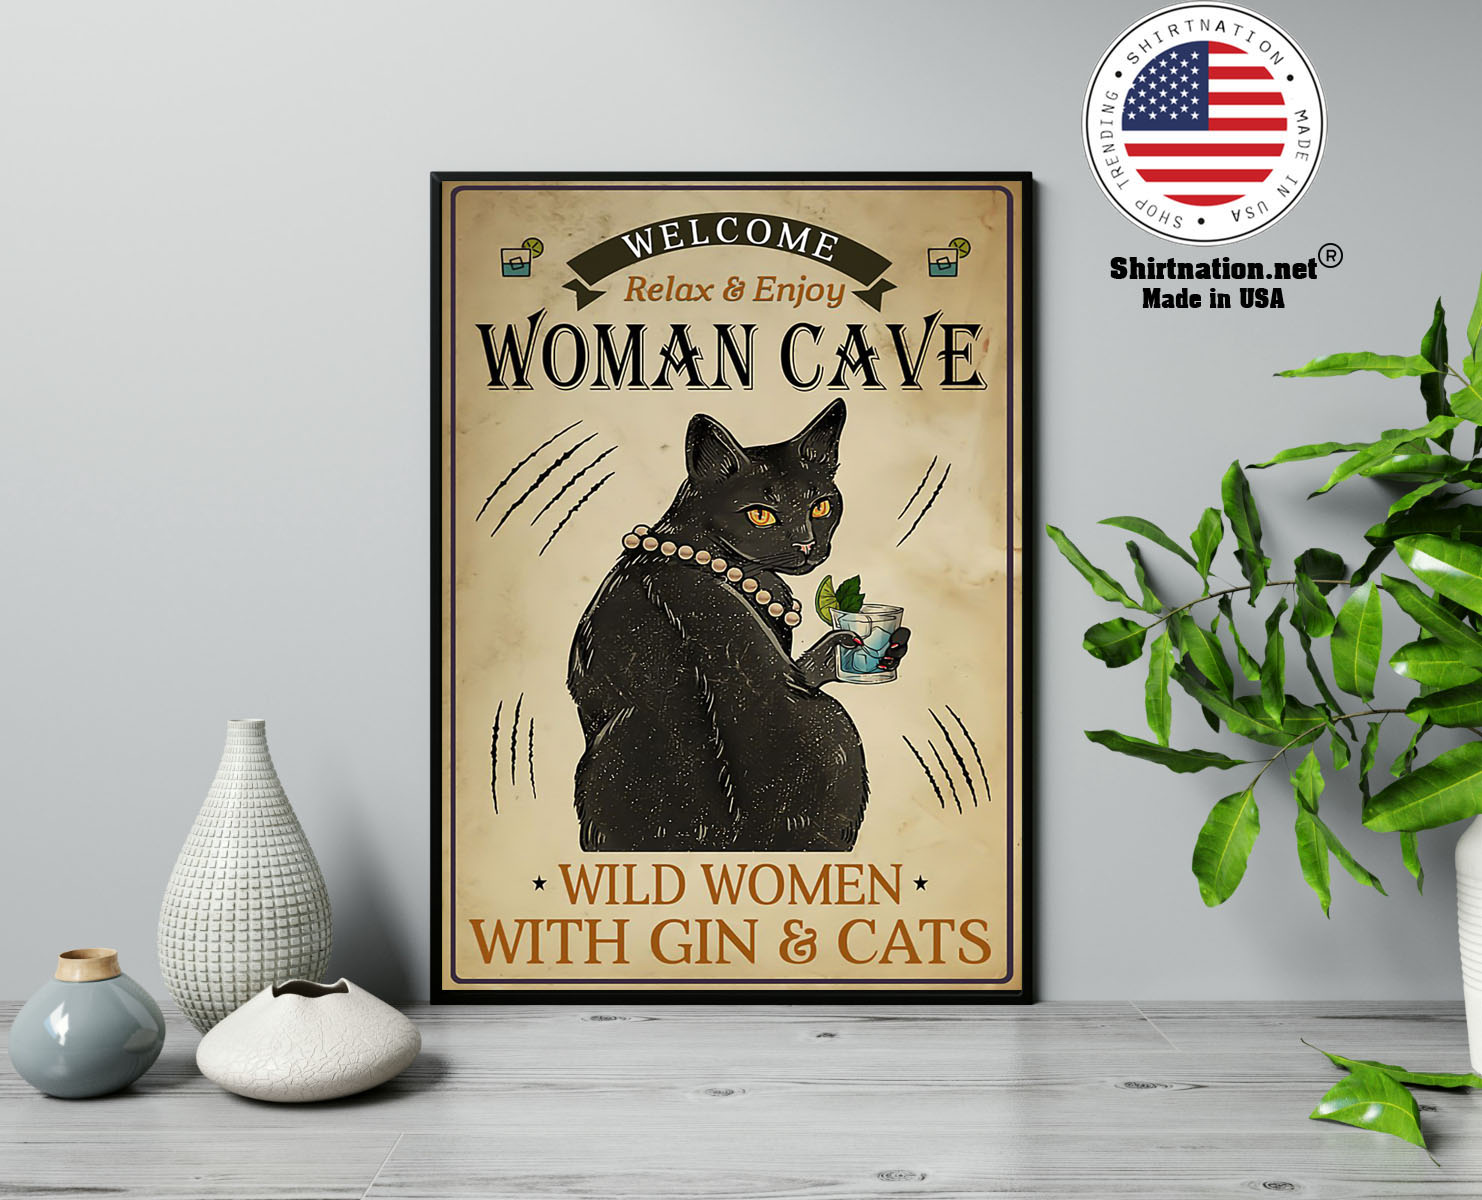 Welcome relax enjoy woman cave will women with gin and cats poster 13